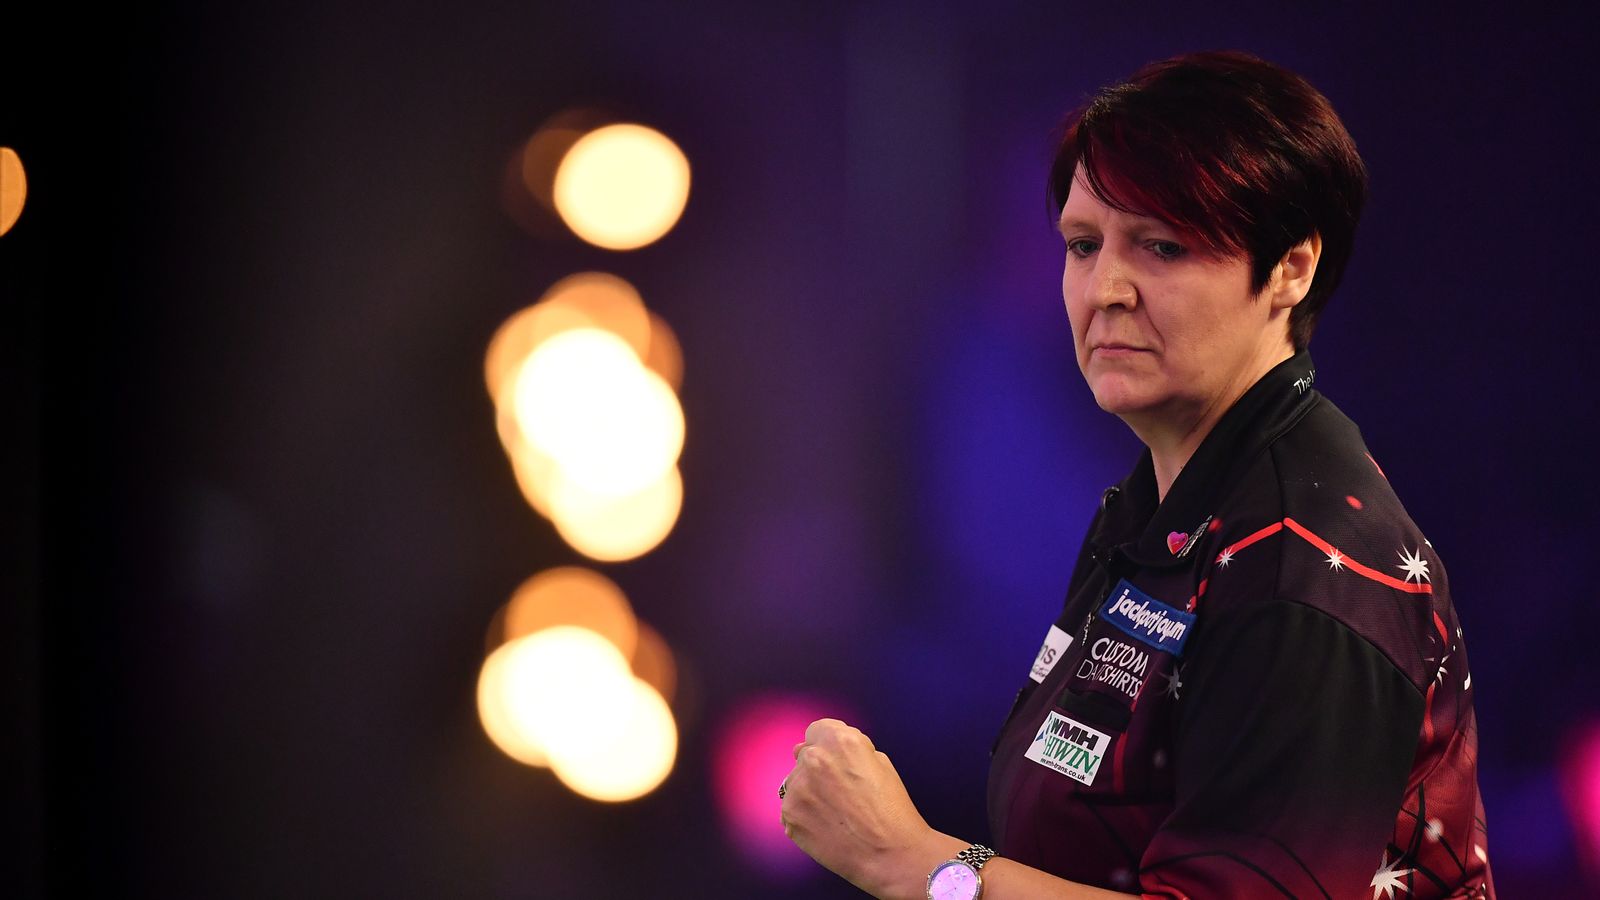 Lisa Ashton wins women's qualifier to seal place at PDC World Darts ...